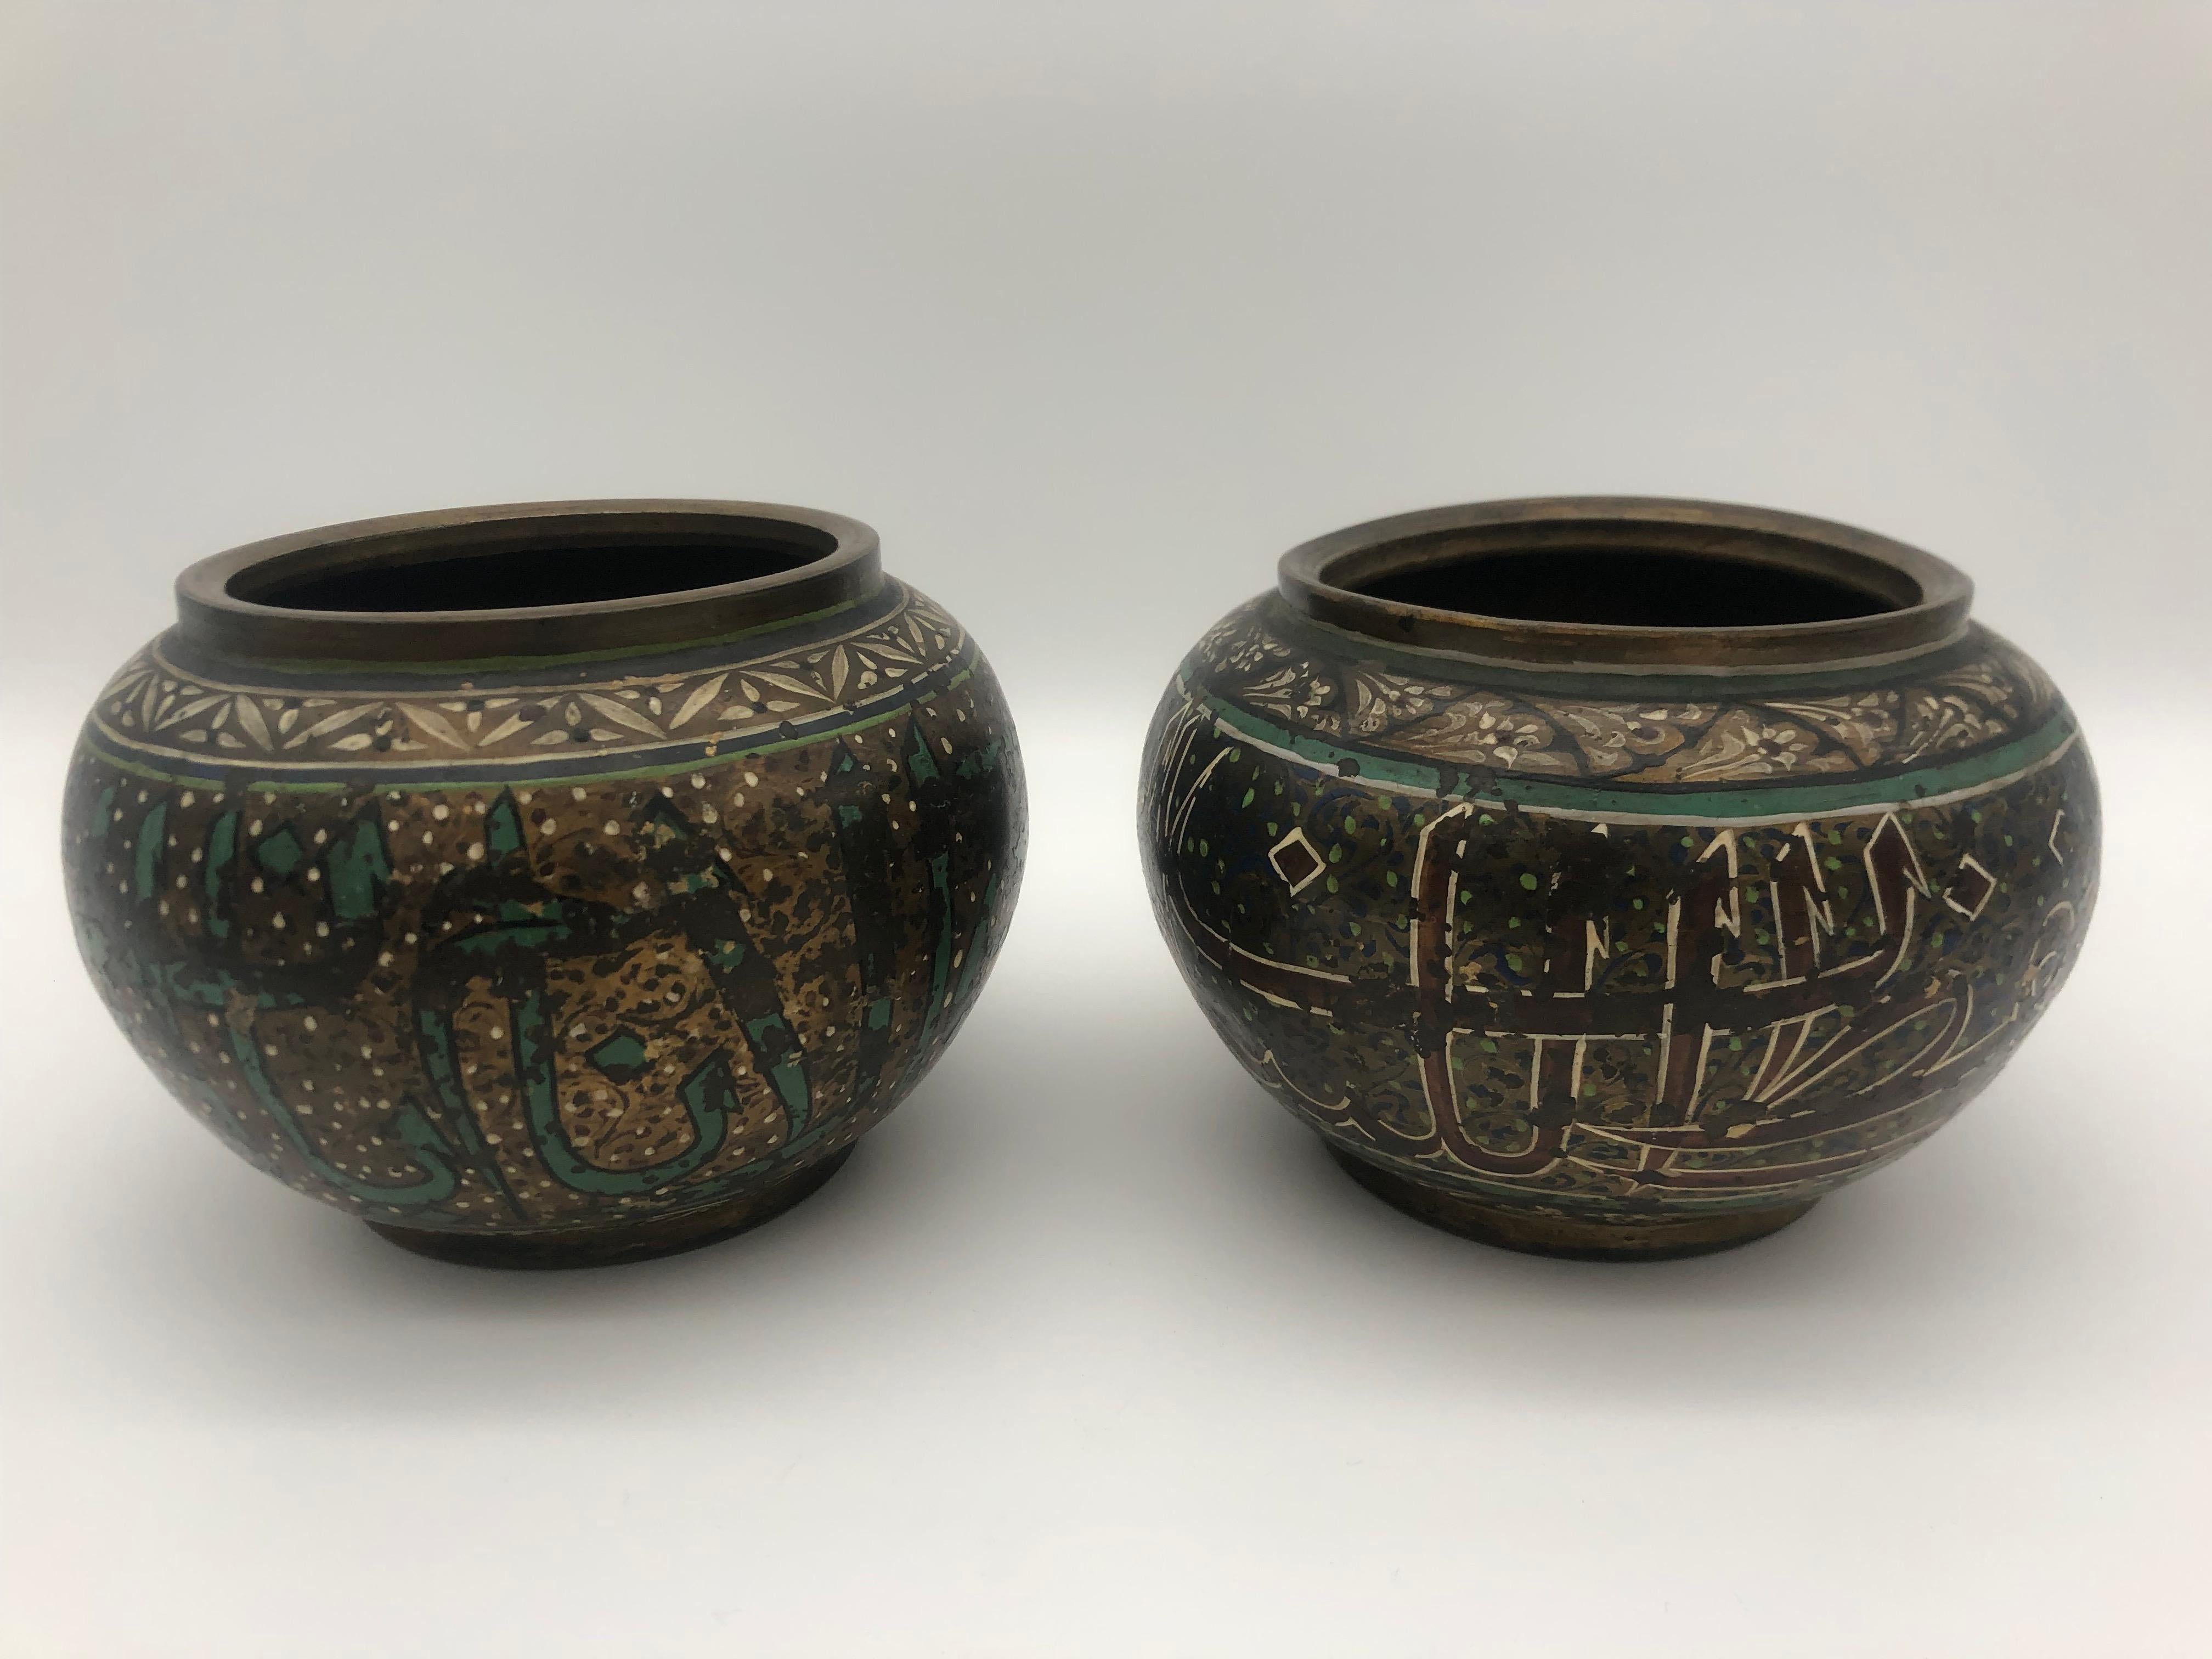 A find pair of Ottoman brass vases with enamel painted patterns and arab inscription on the surface.
Both with old ink written numbers on the bottom.

They are in good condition, although the paint on the surface is partly a bit rubbed, they don't